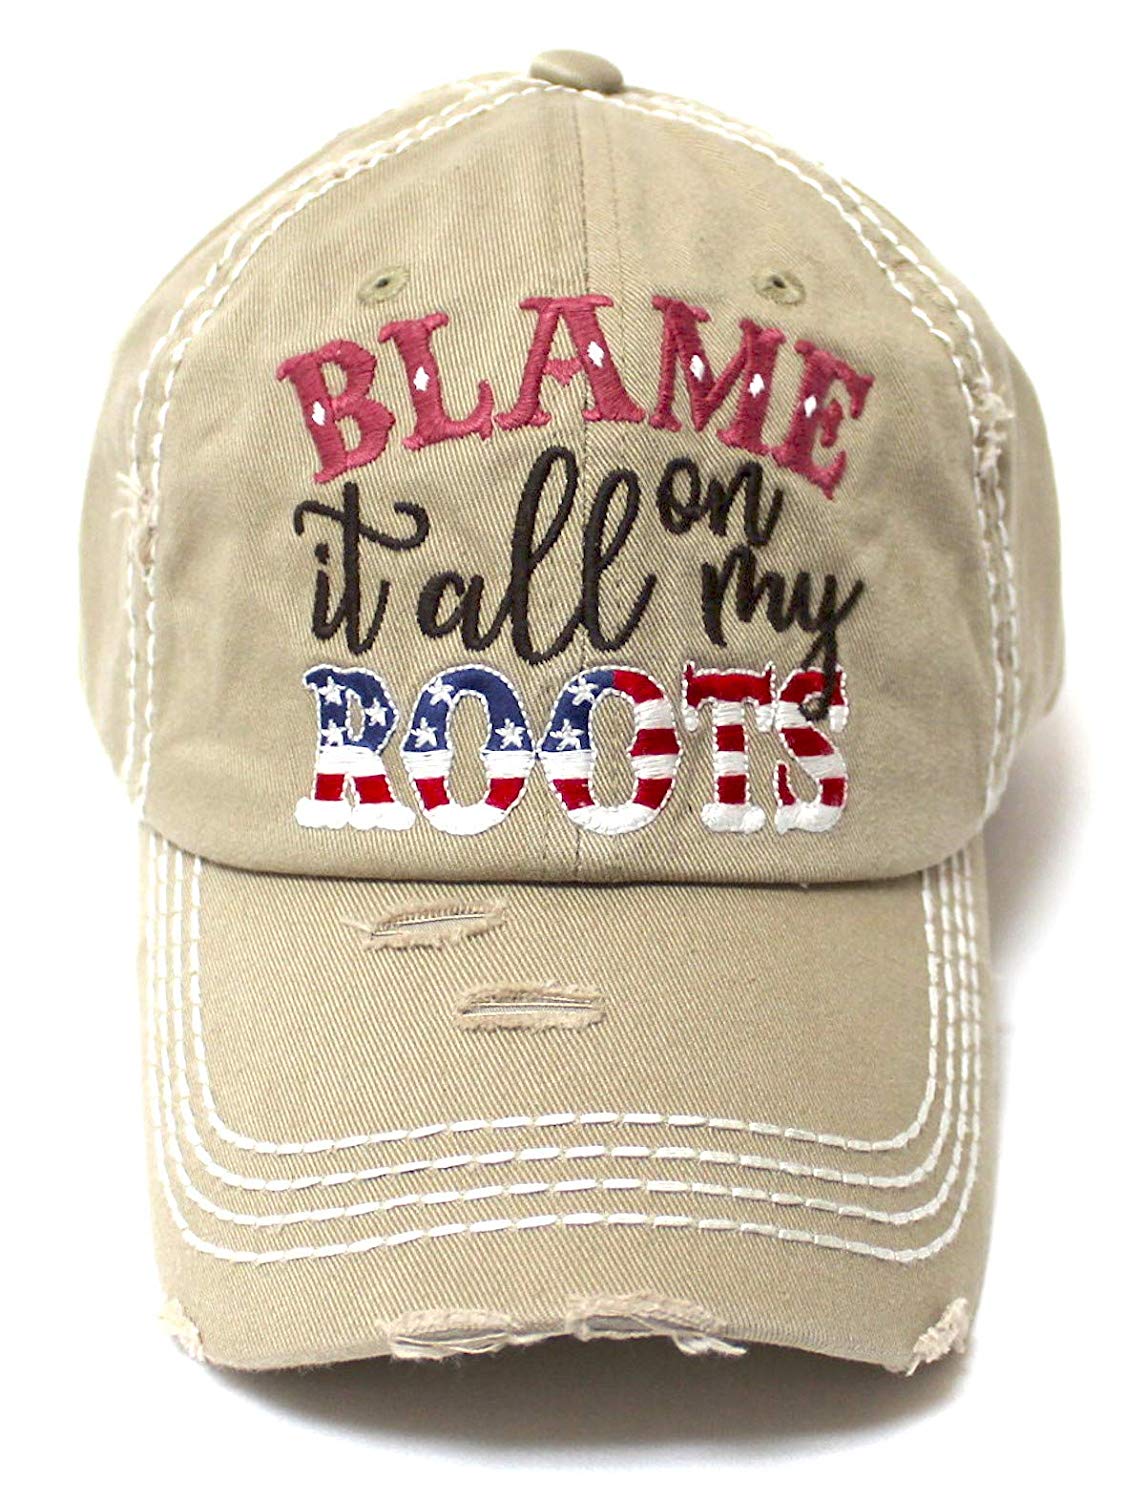 Classic Ballcap Blame it All on My Roots Monogram Embroidery USA Flag Themed Hat, Western Khaki - Caps 'N Vintage 